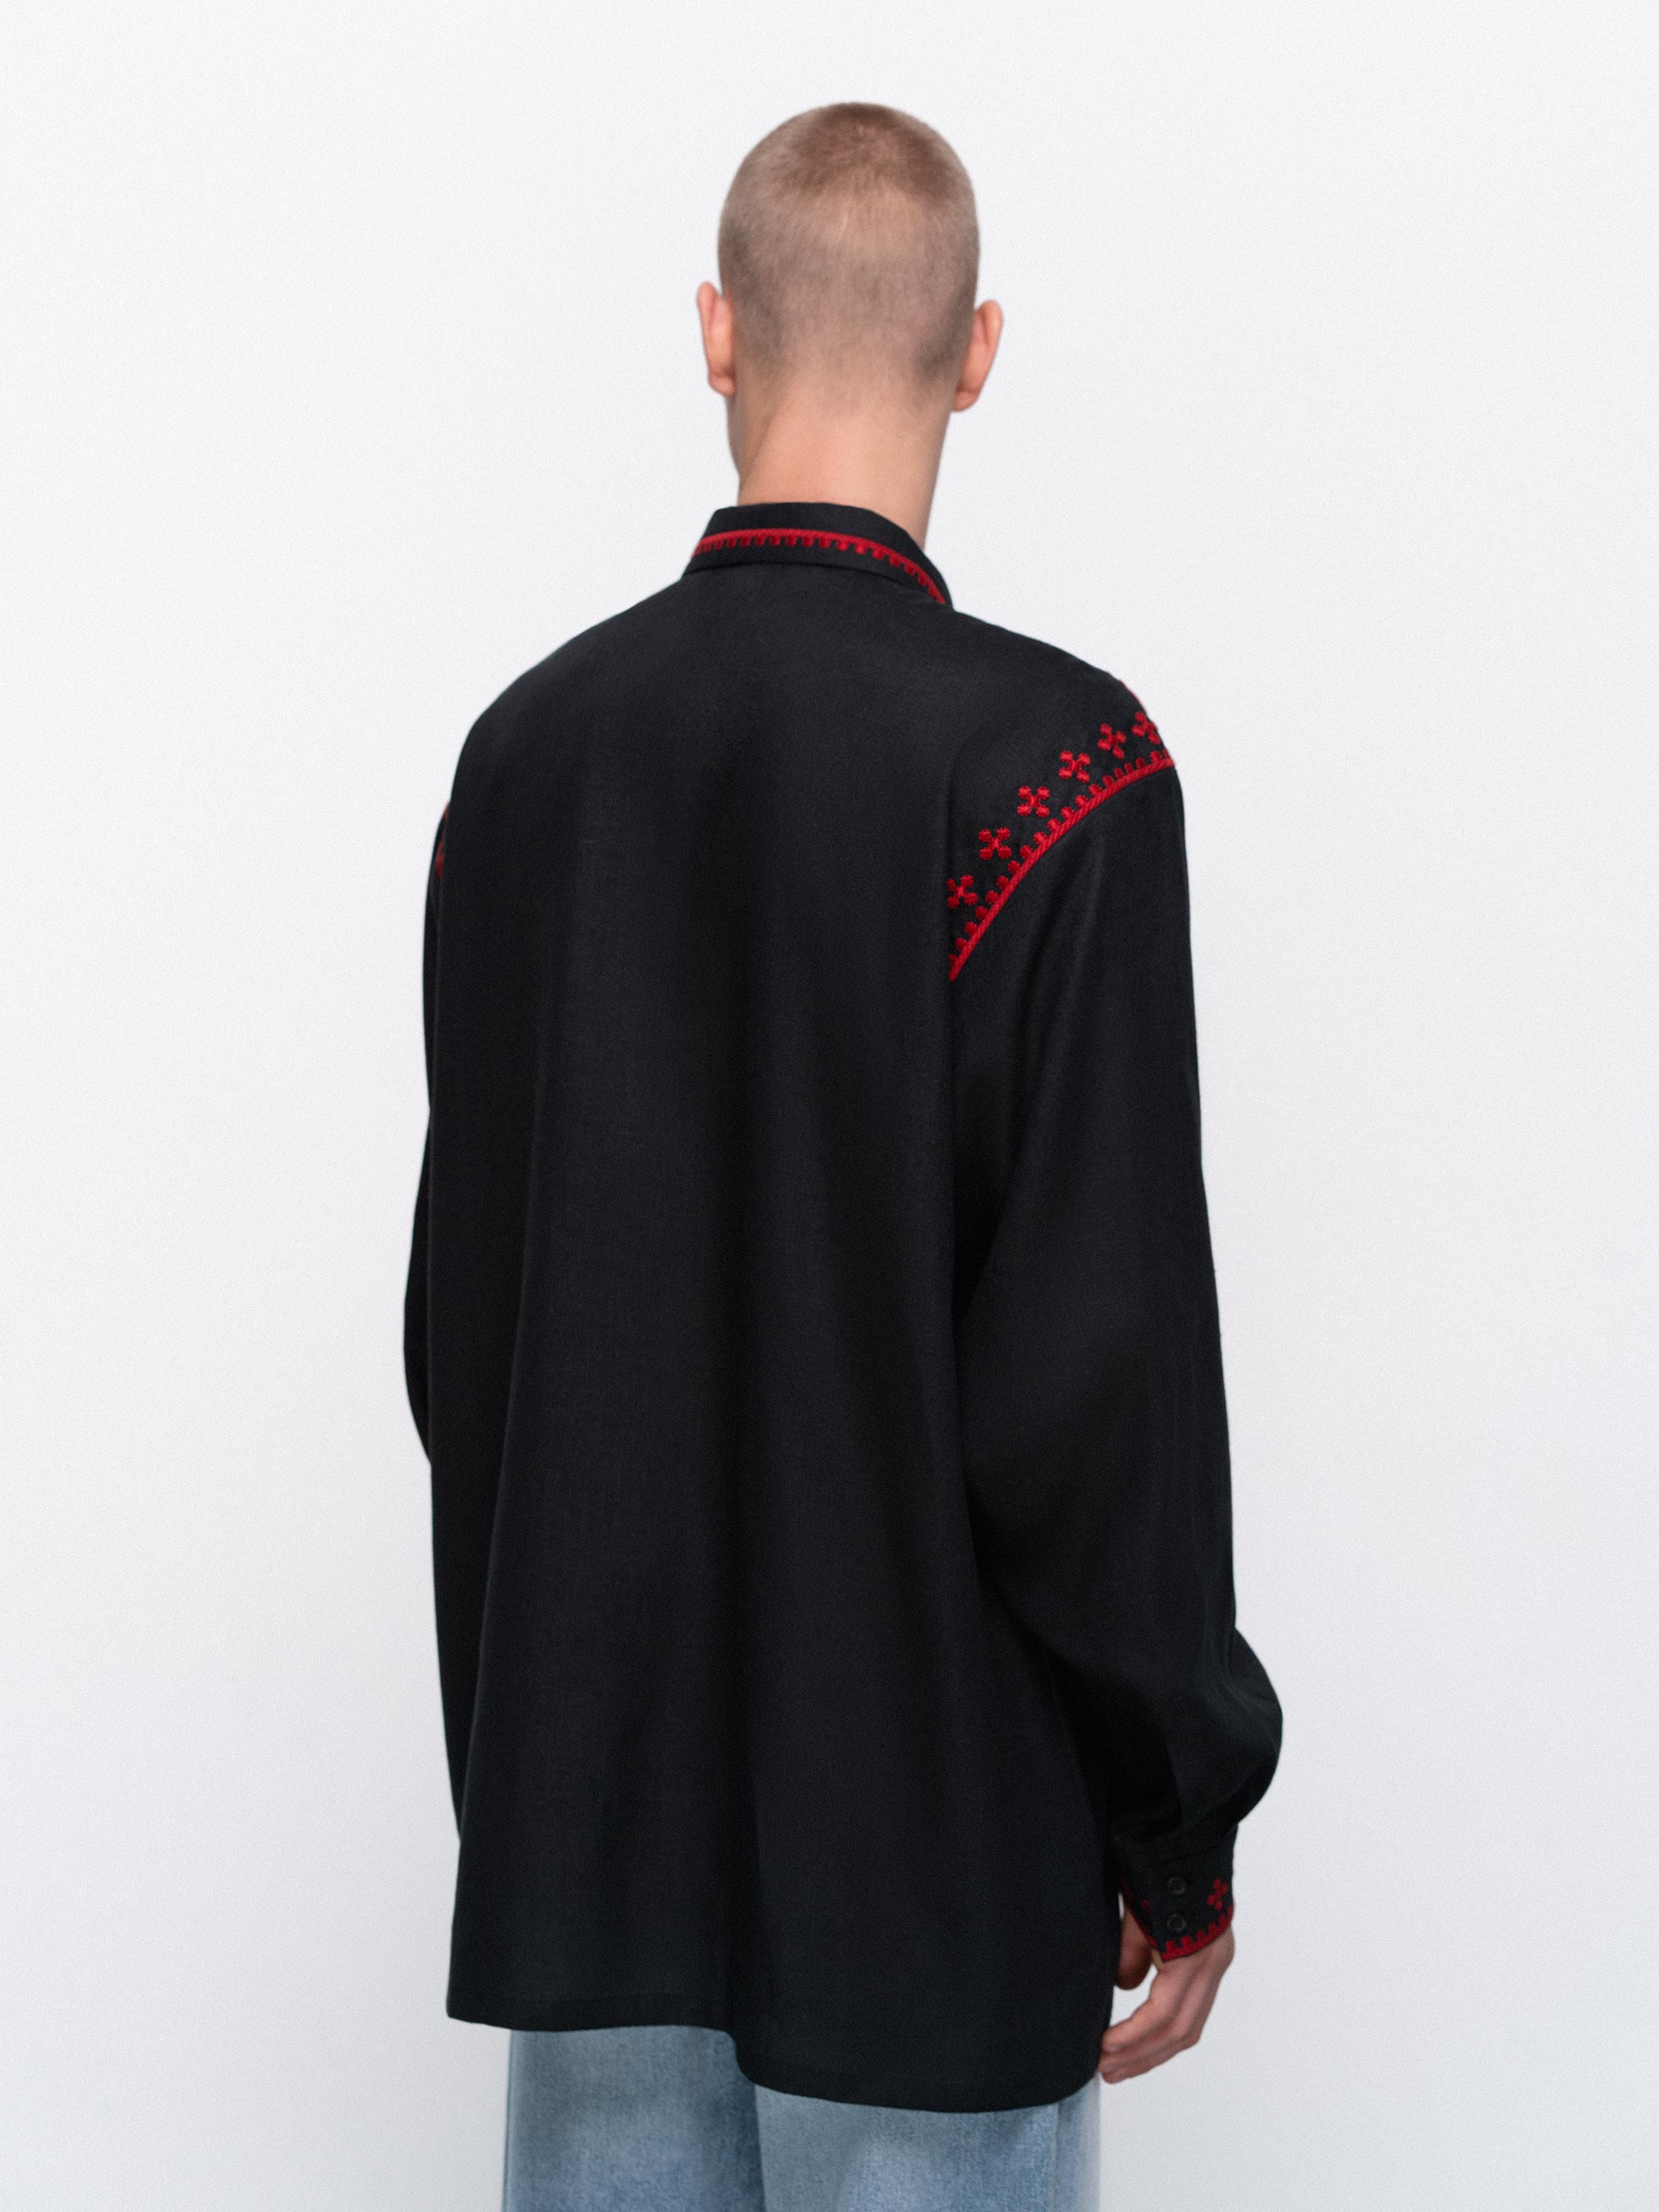 Men's embroidered shirt with a collar and massive tassels Zemlya - photo 2